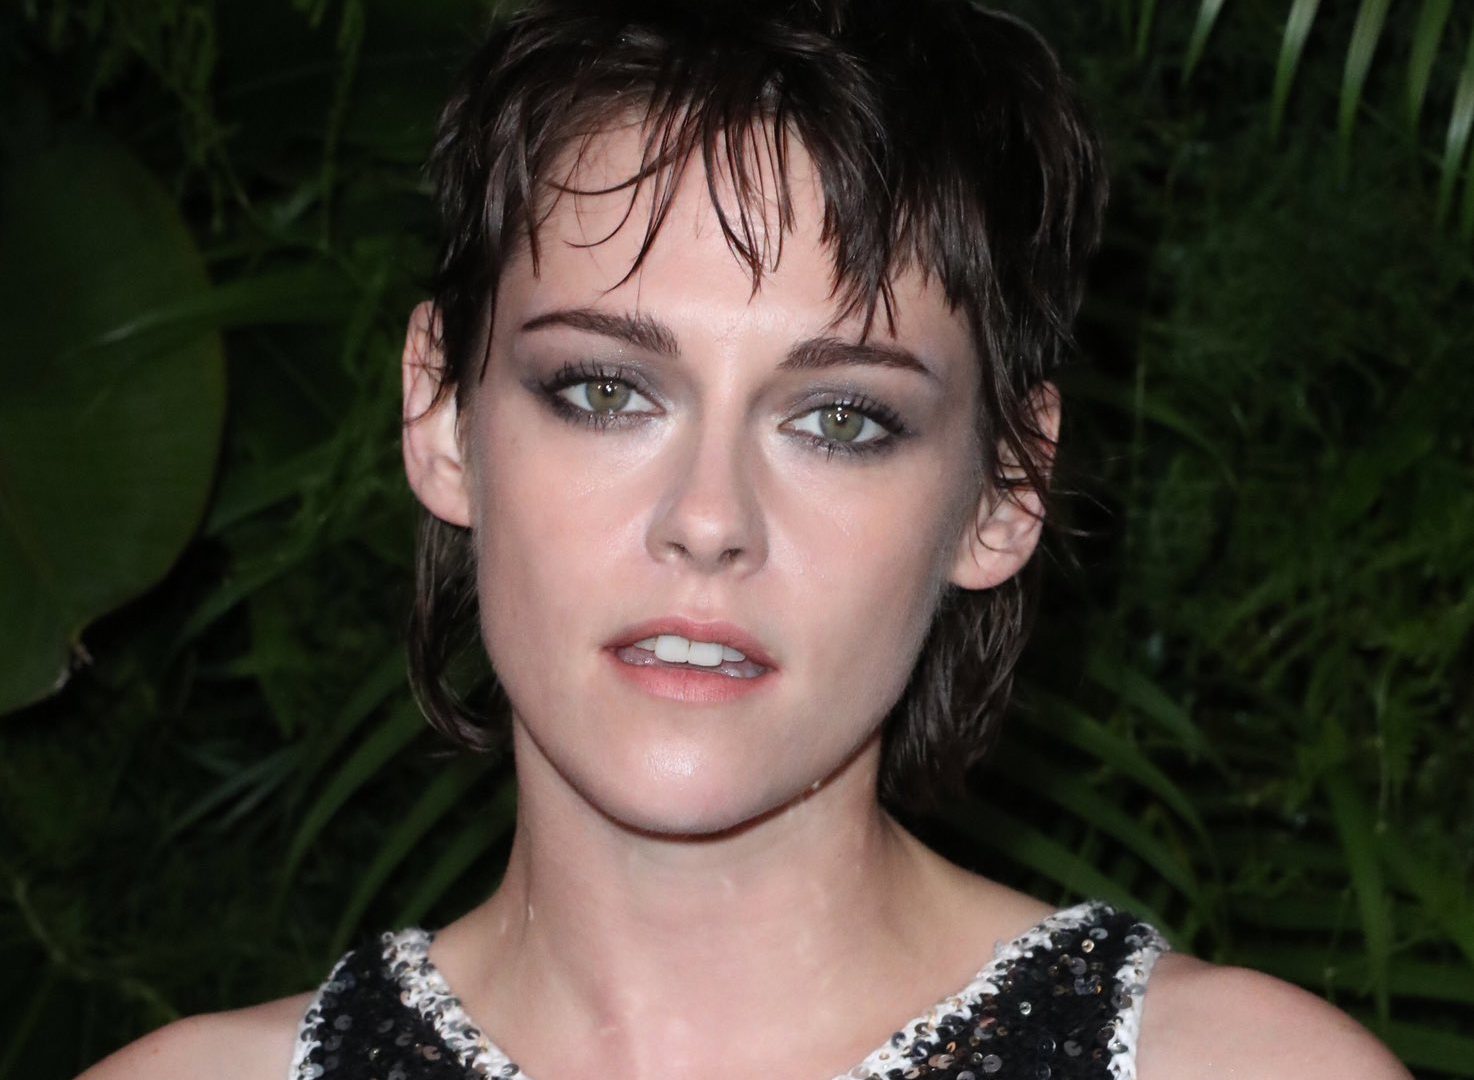 Kristen Stewart Attends The Chanel and Charles Finch's PreOscar Awards